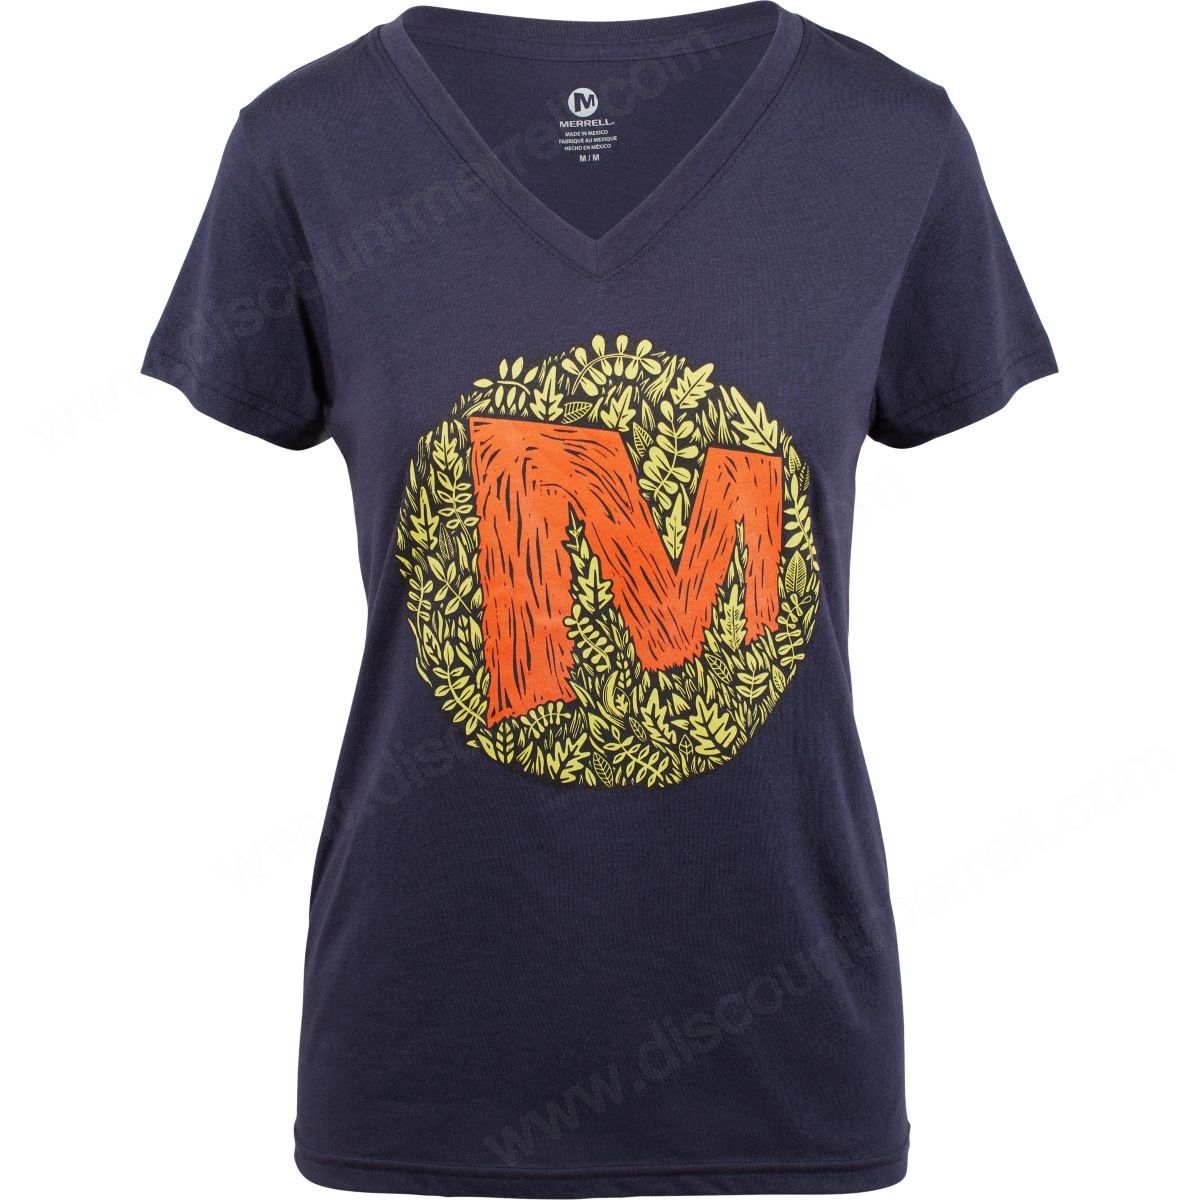 Merrell Lady's Merrell Forest T-Shirts Navy - -0